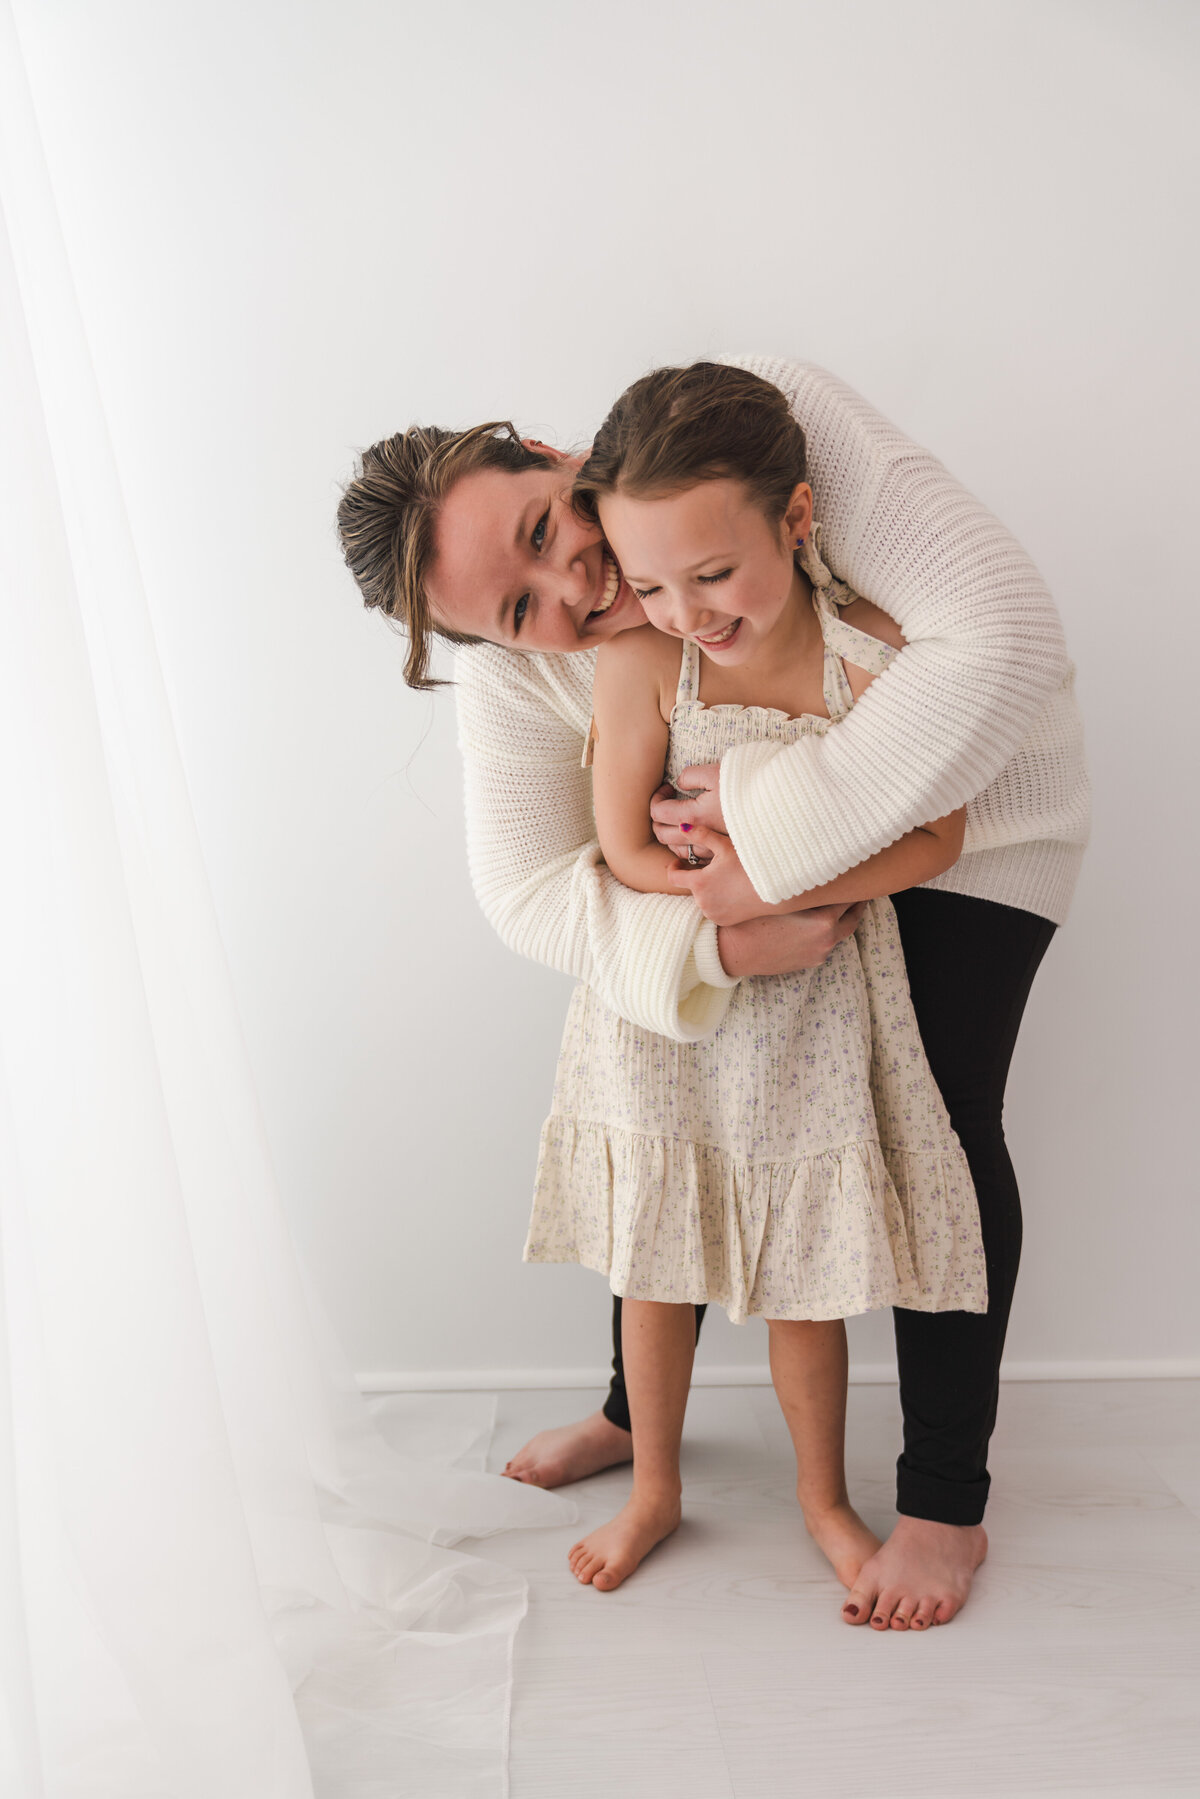 A heartwarming moment between a smiling woman and a giggling young girl as they share a close embrace in a bright, minimalist room.